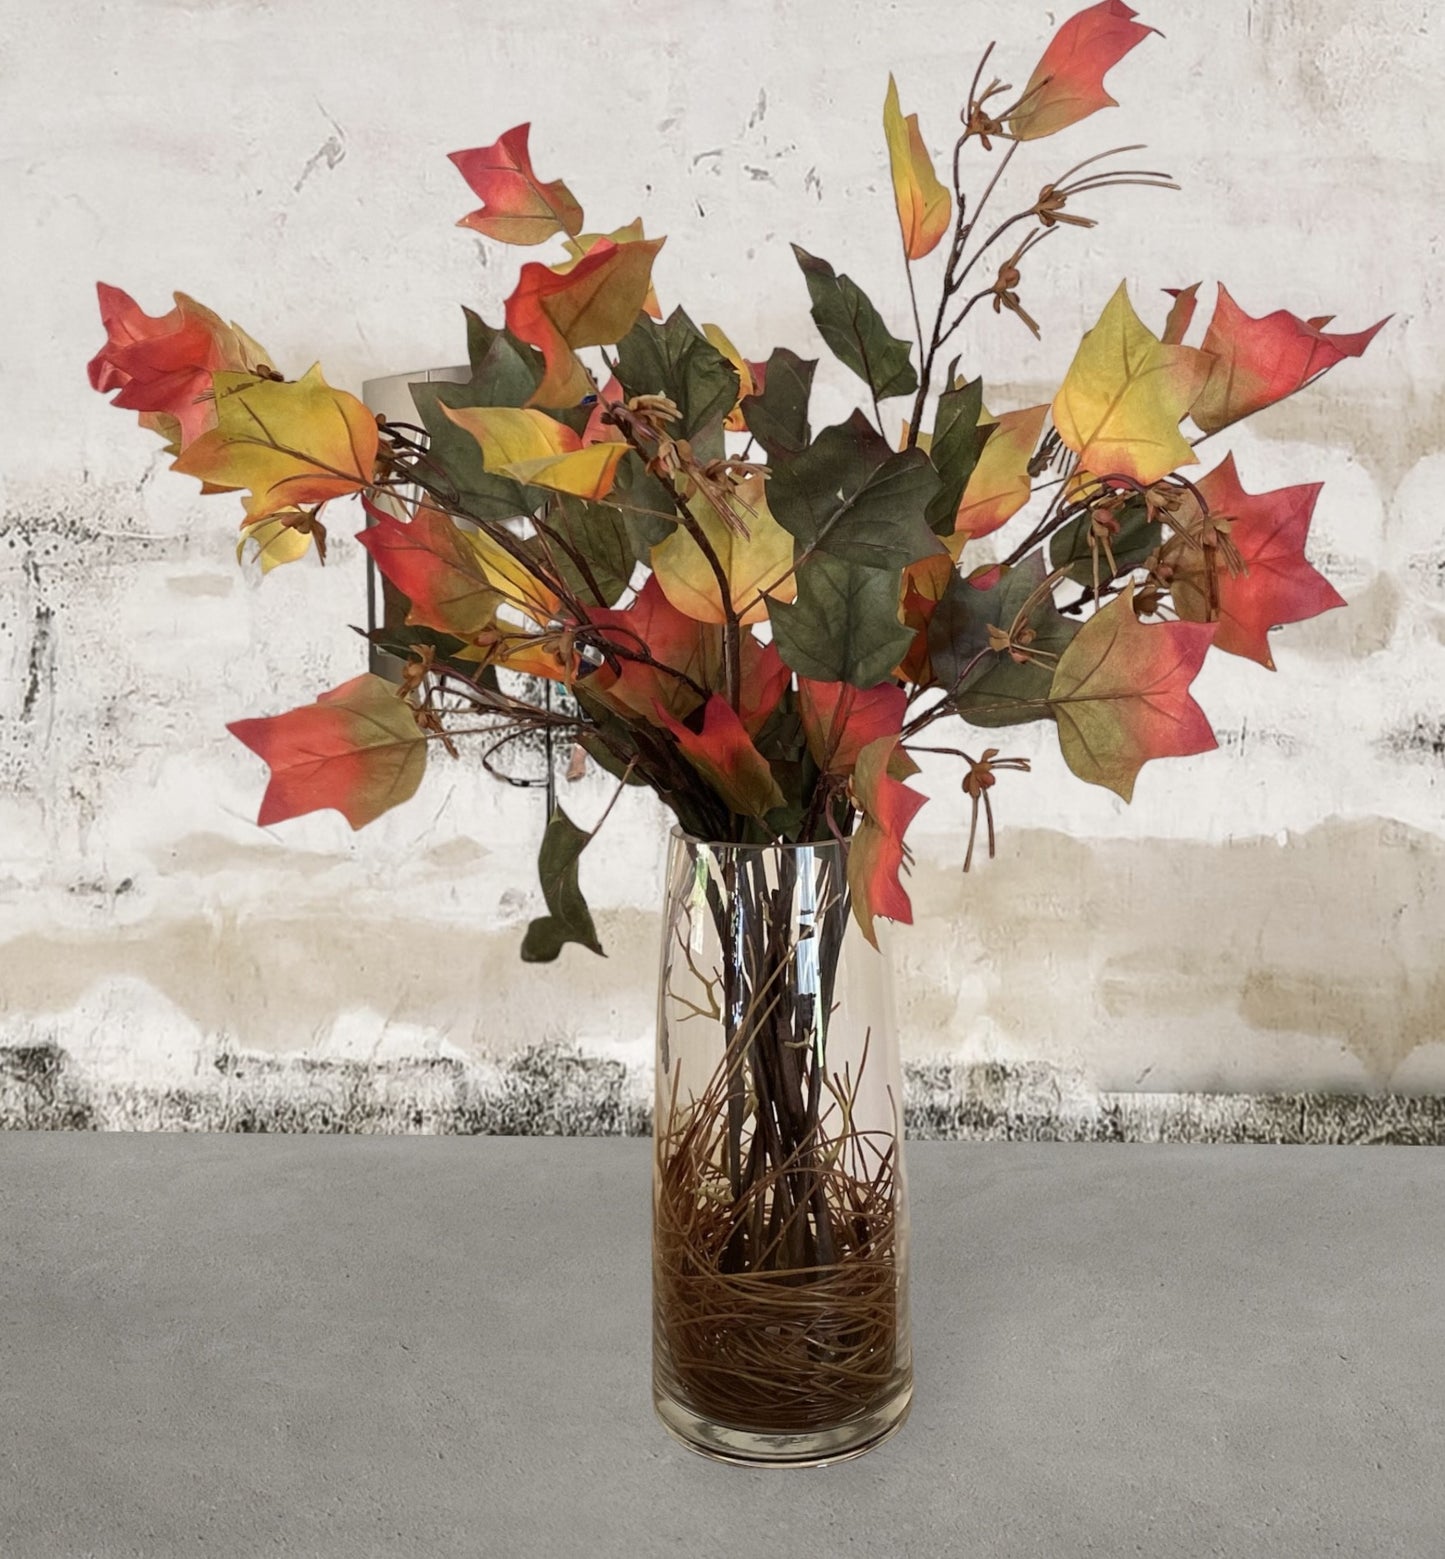 Autumn Leaves: 60cm Tall Arrangement with Clear Resin or 'Birds Nest' Look